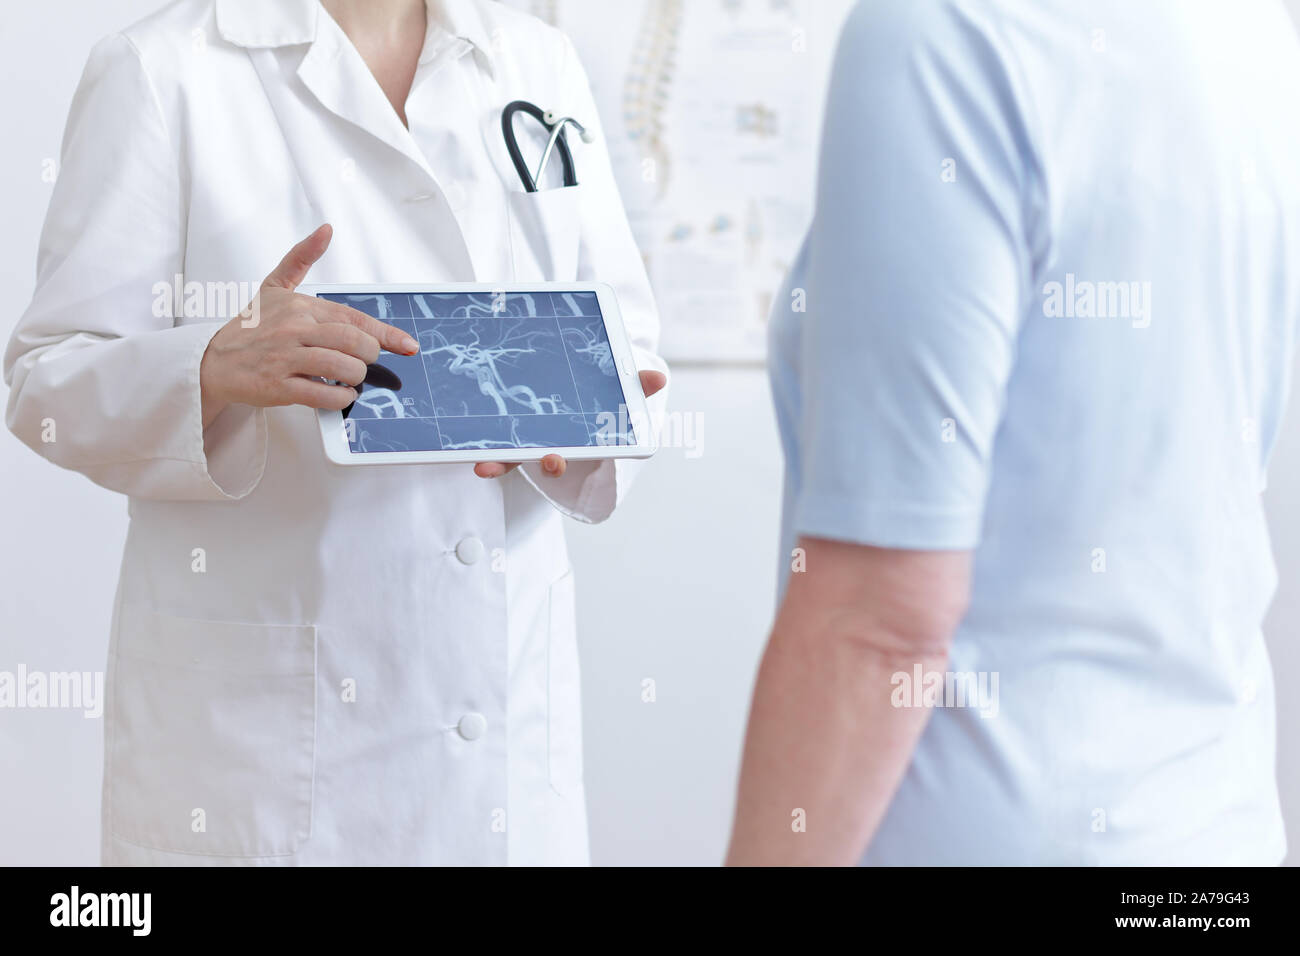 Stroke prevention concept: doctor with tablet pc showing her patient an mra image of her cerebral blood vessels. Stock Photo